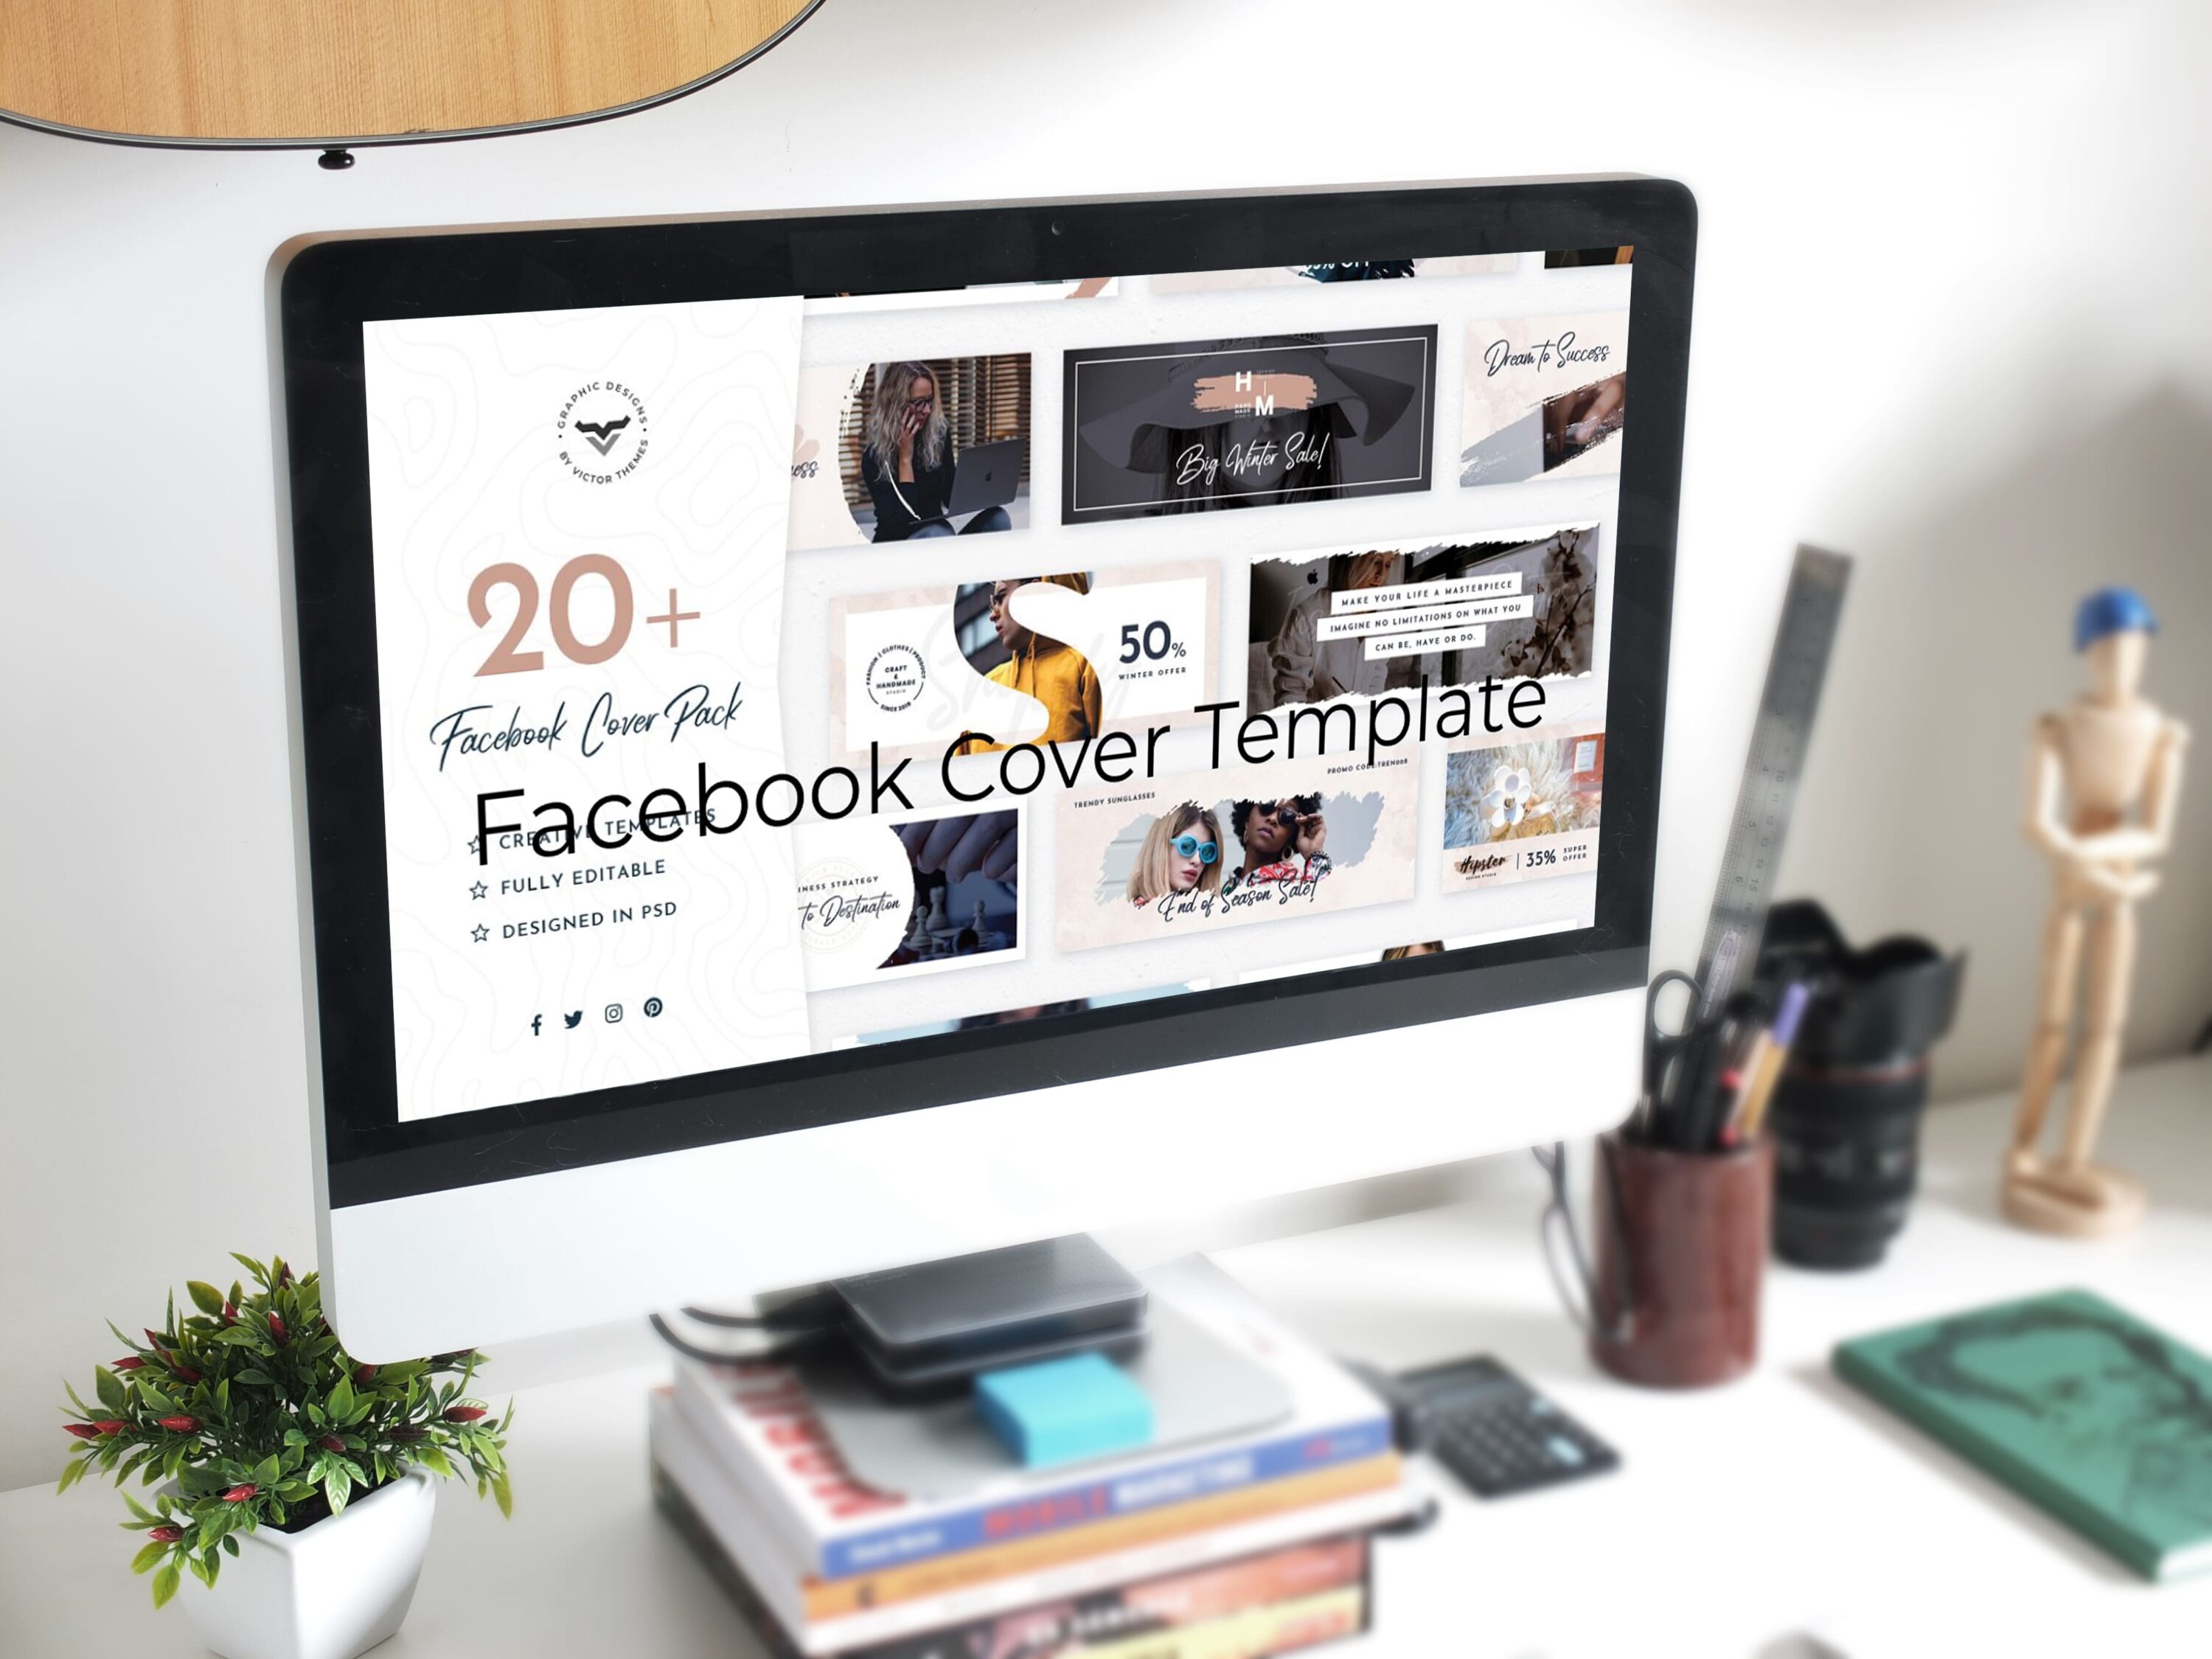 Desktop option of the Facebook Cover Template.